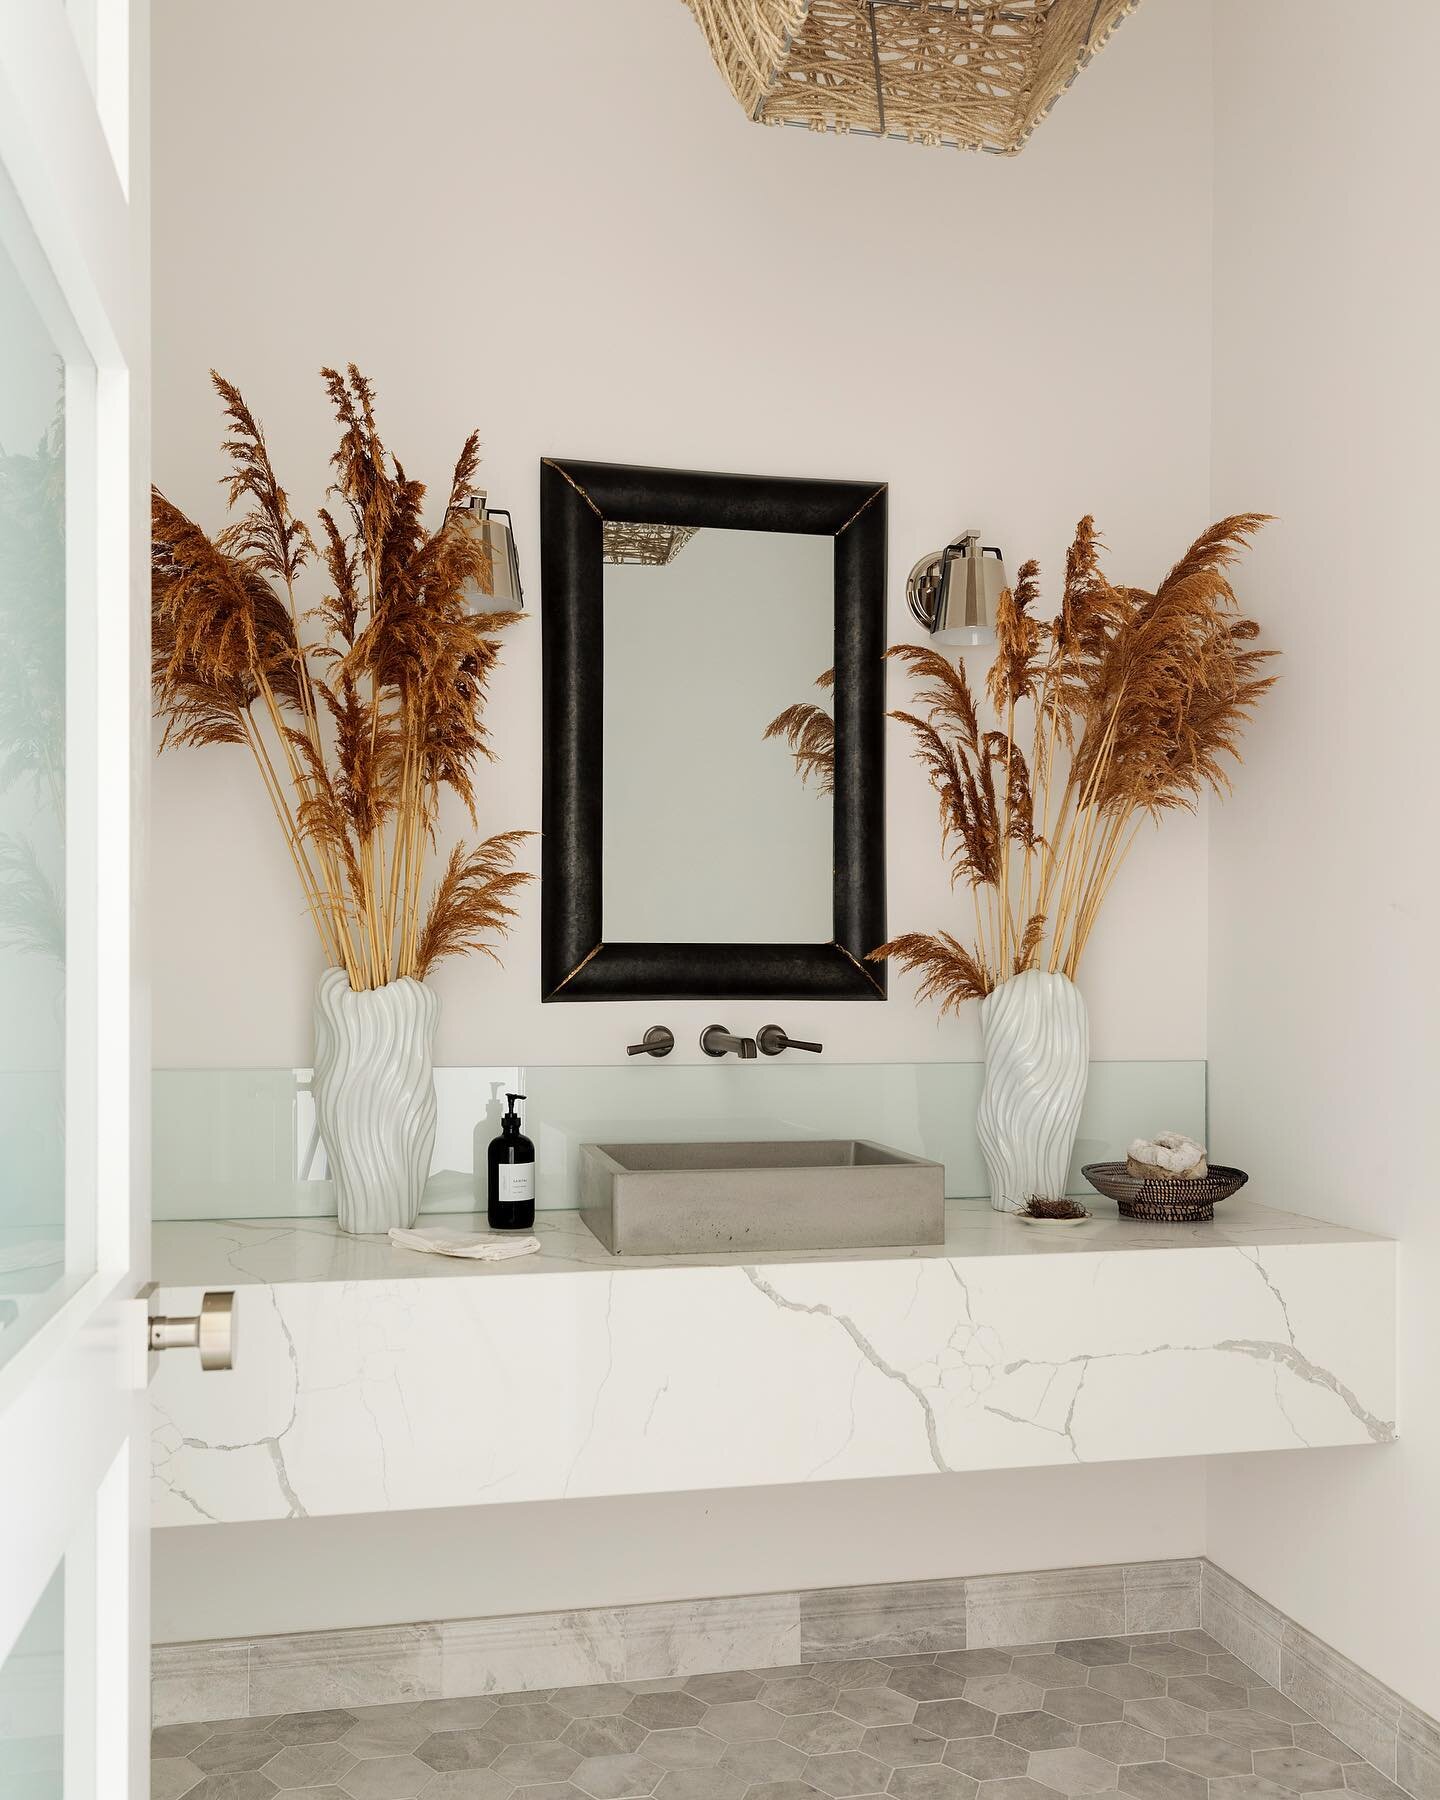 This tropical, breathtaking powder room features designer EMTEK hardware, Calacatta Venice quartz, Hinkley lighting, and dried grasses that make this space feel like you&rsquo;re on vacation from the moment you enter! 

Design ➕ build by @kellifontan